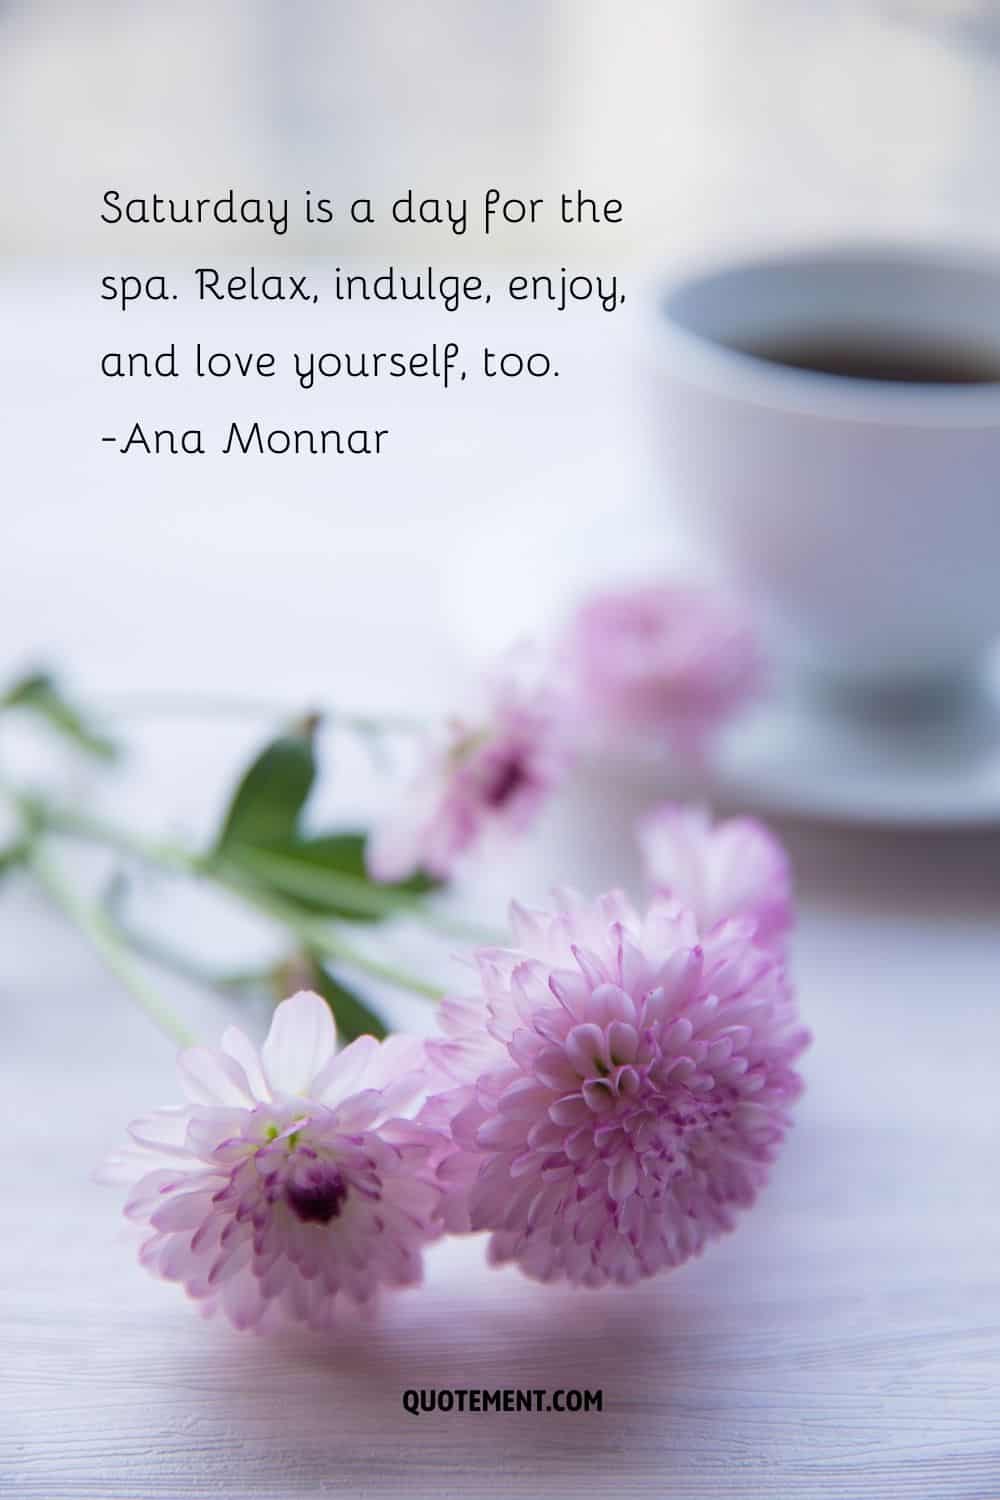 Saturday is a day for the spa. Relax, indulge, enjoy, and love yourself, too